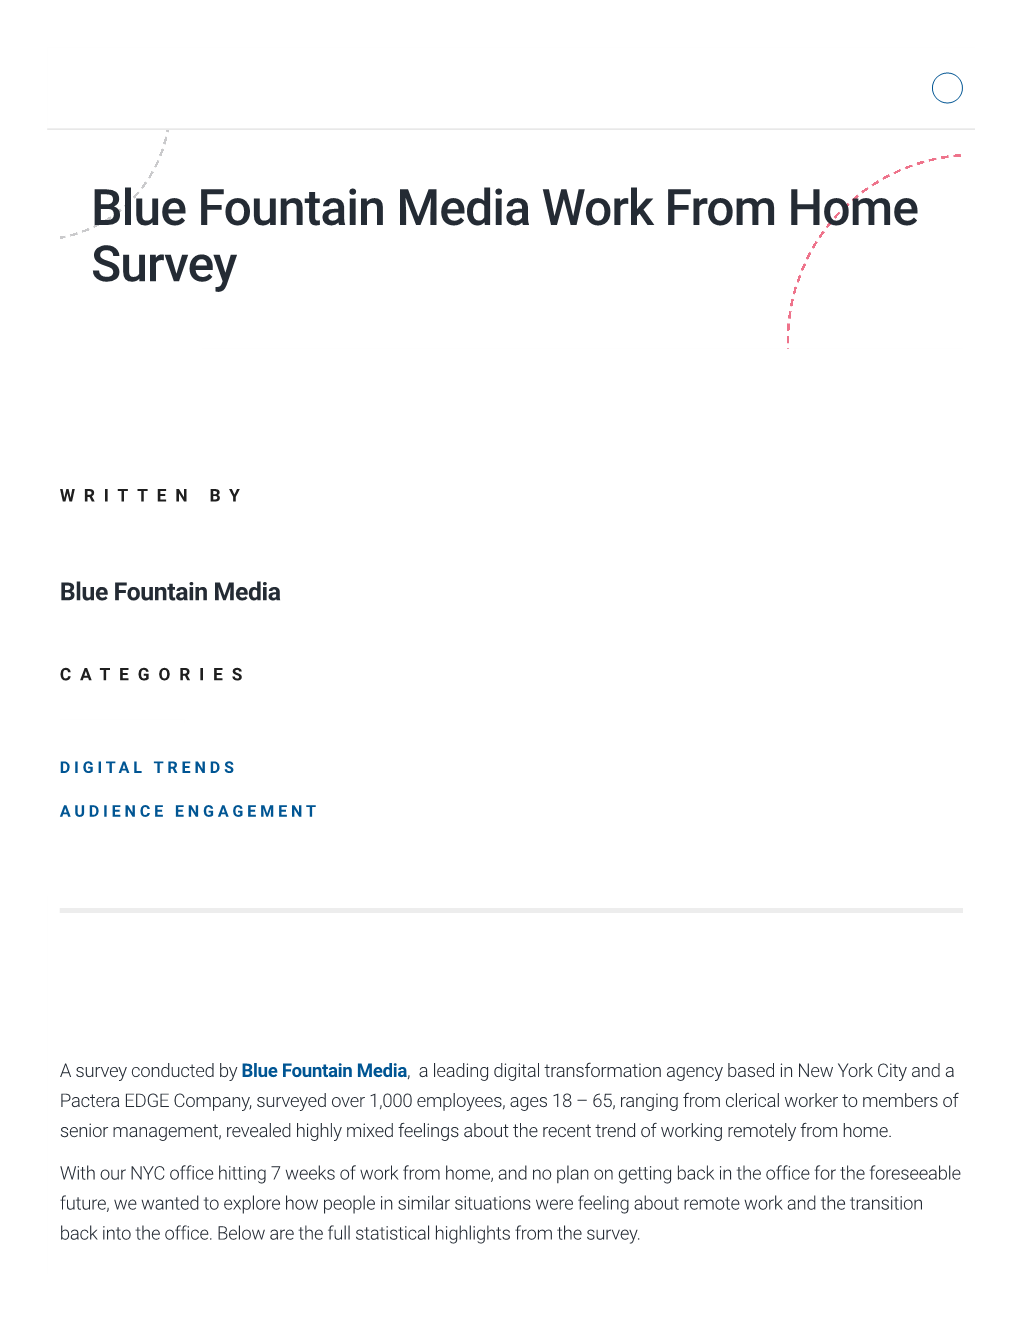 Blue Fountain Media Work from Home Survey